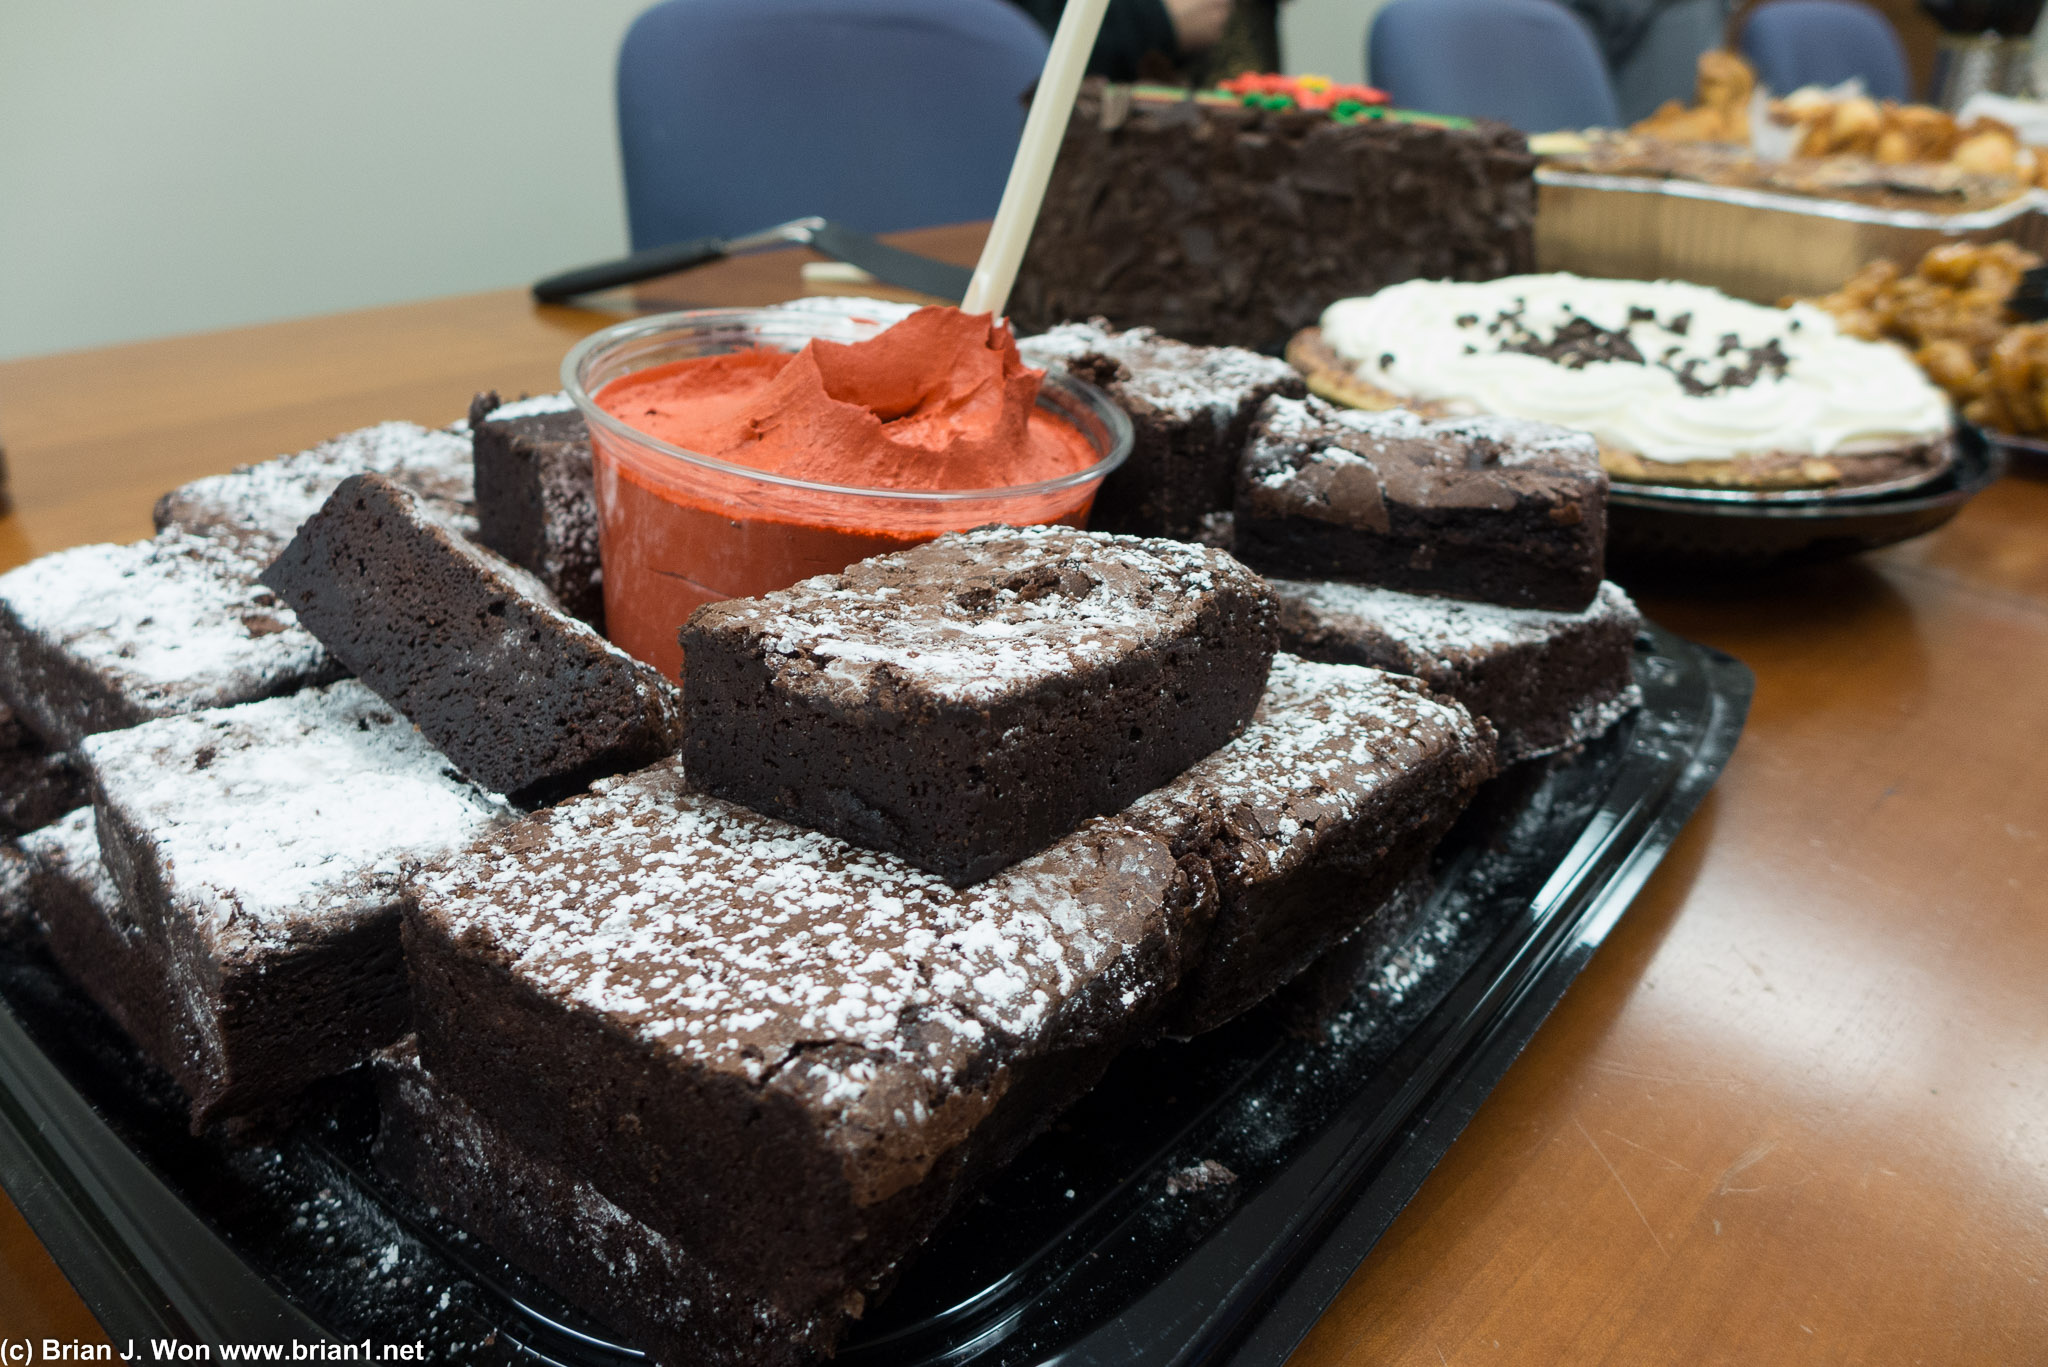 Desserts at the SSC Holiday Potluck.